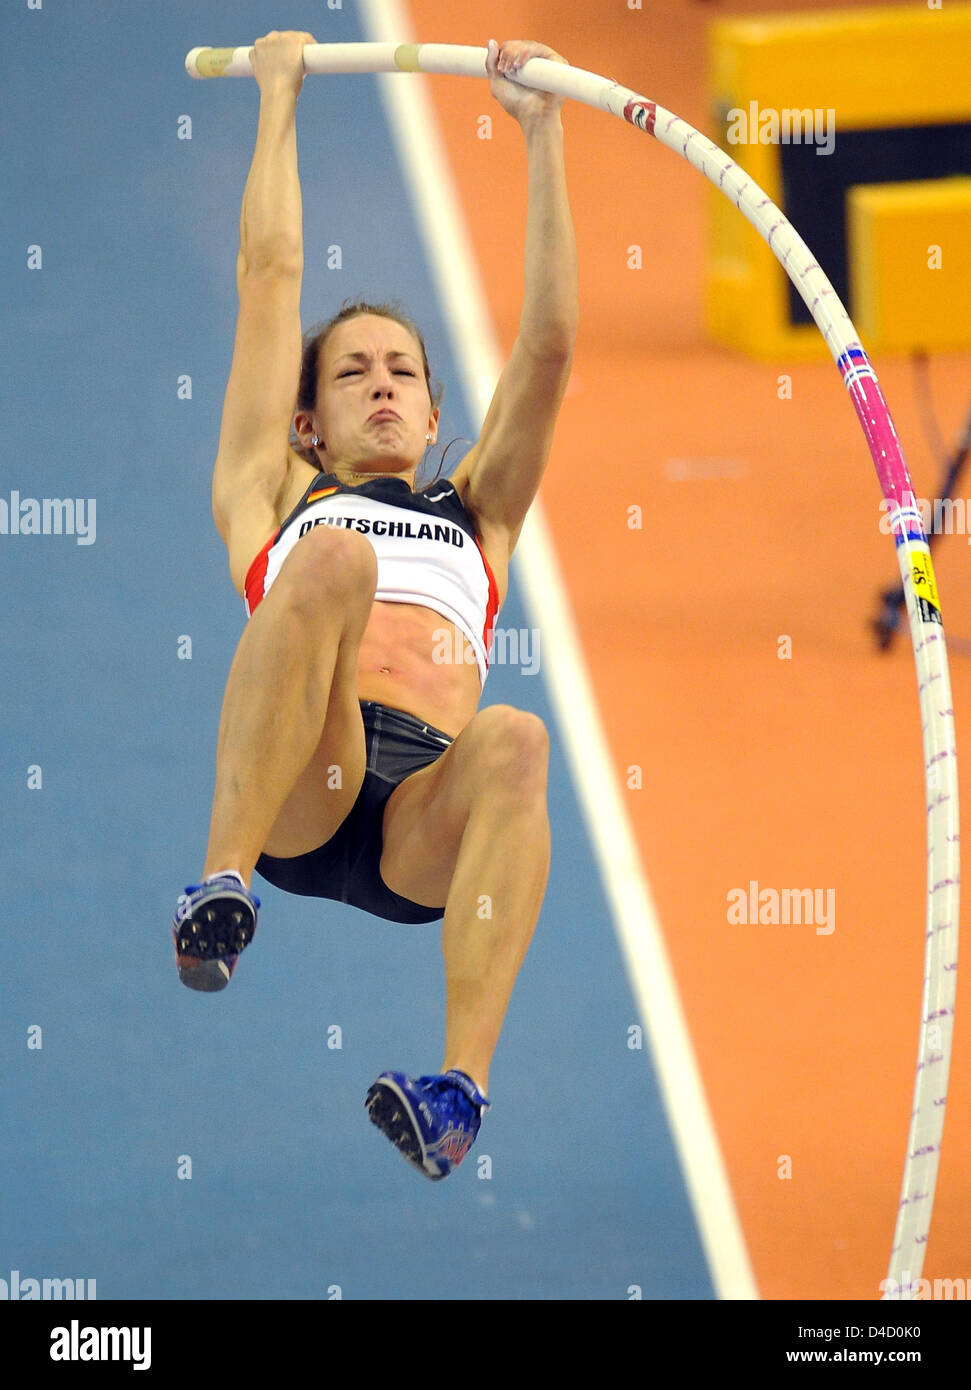 German polevaulter Anna Battke is pictured in action during the  polevaulting finals at the 12th IAAF World Indoor Championships in  Athletics in Valencia, Spain, 08 March 2008. Photo: GERO BRELOER Stock  Photo - Alamy